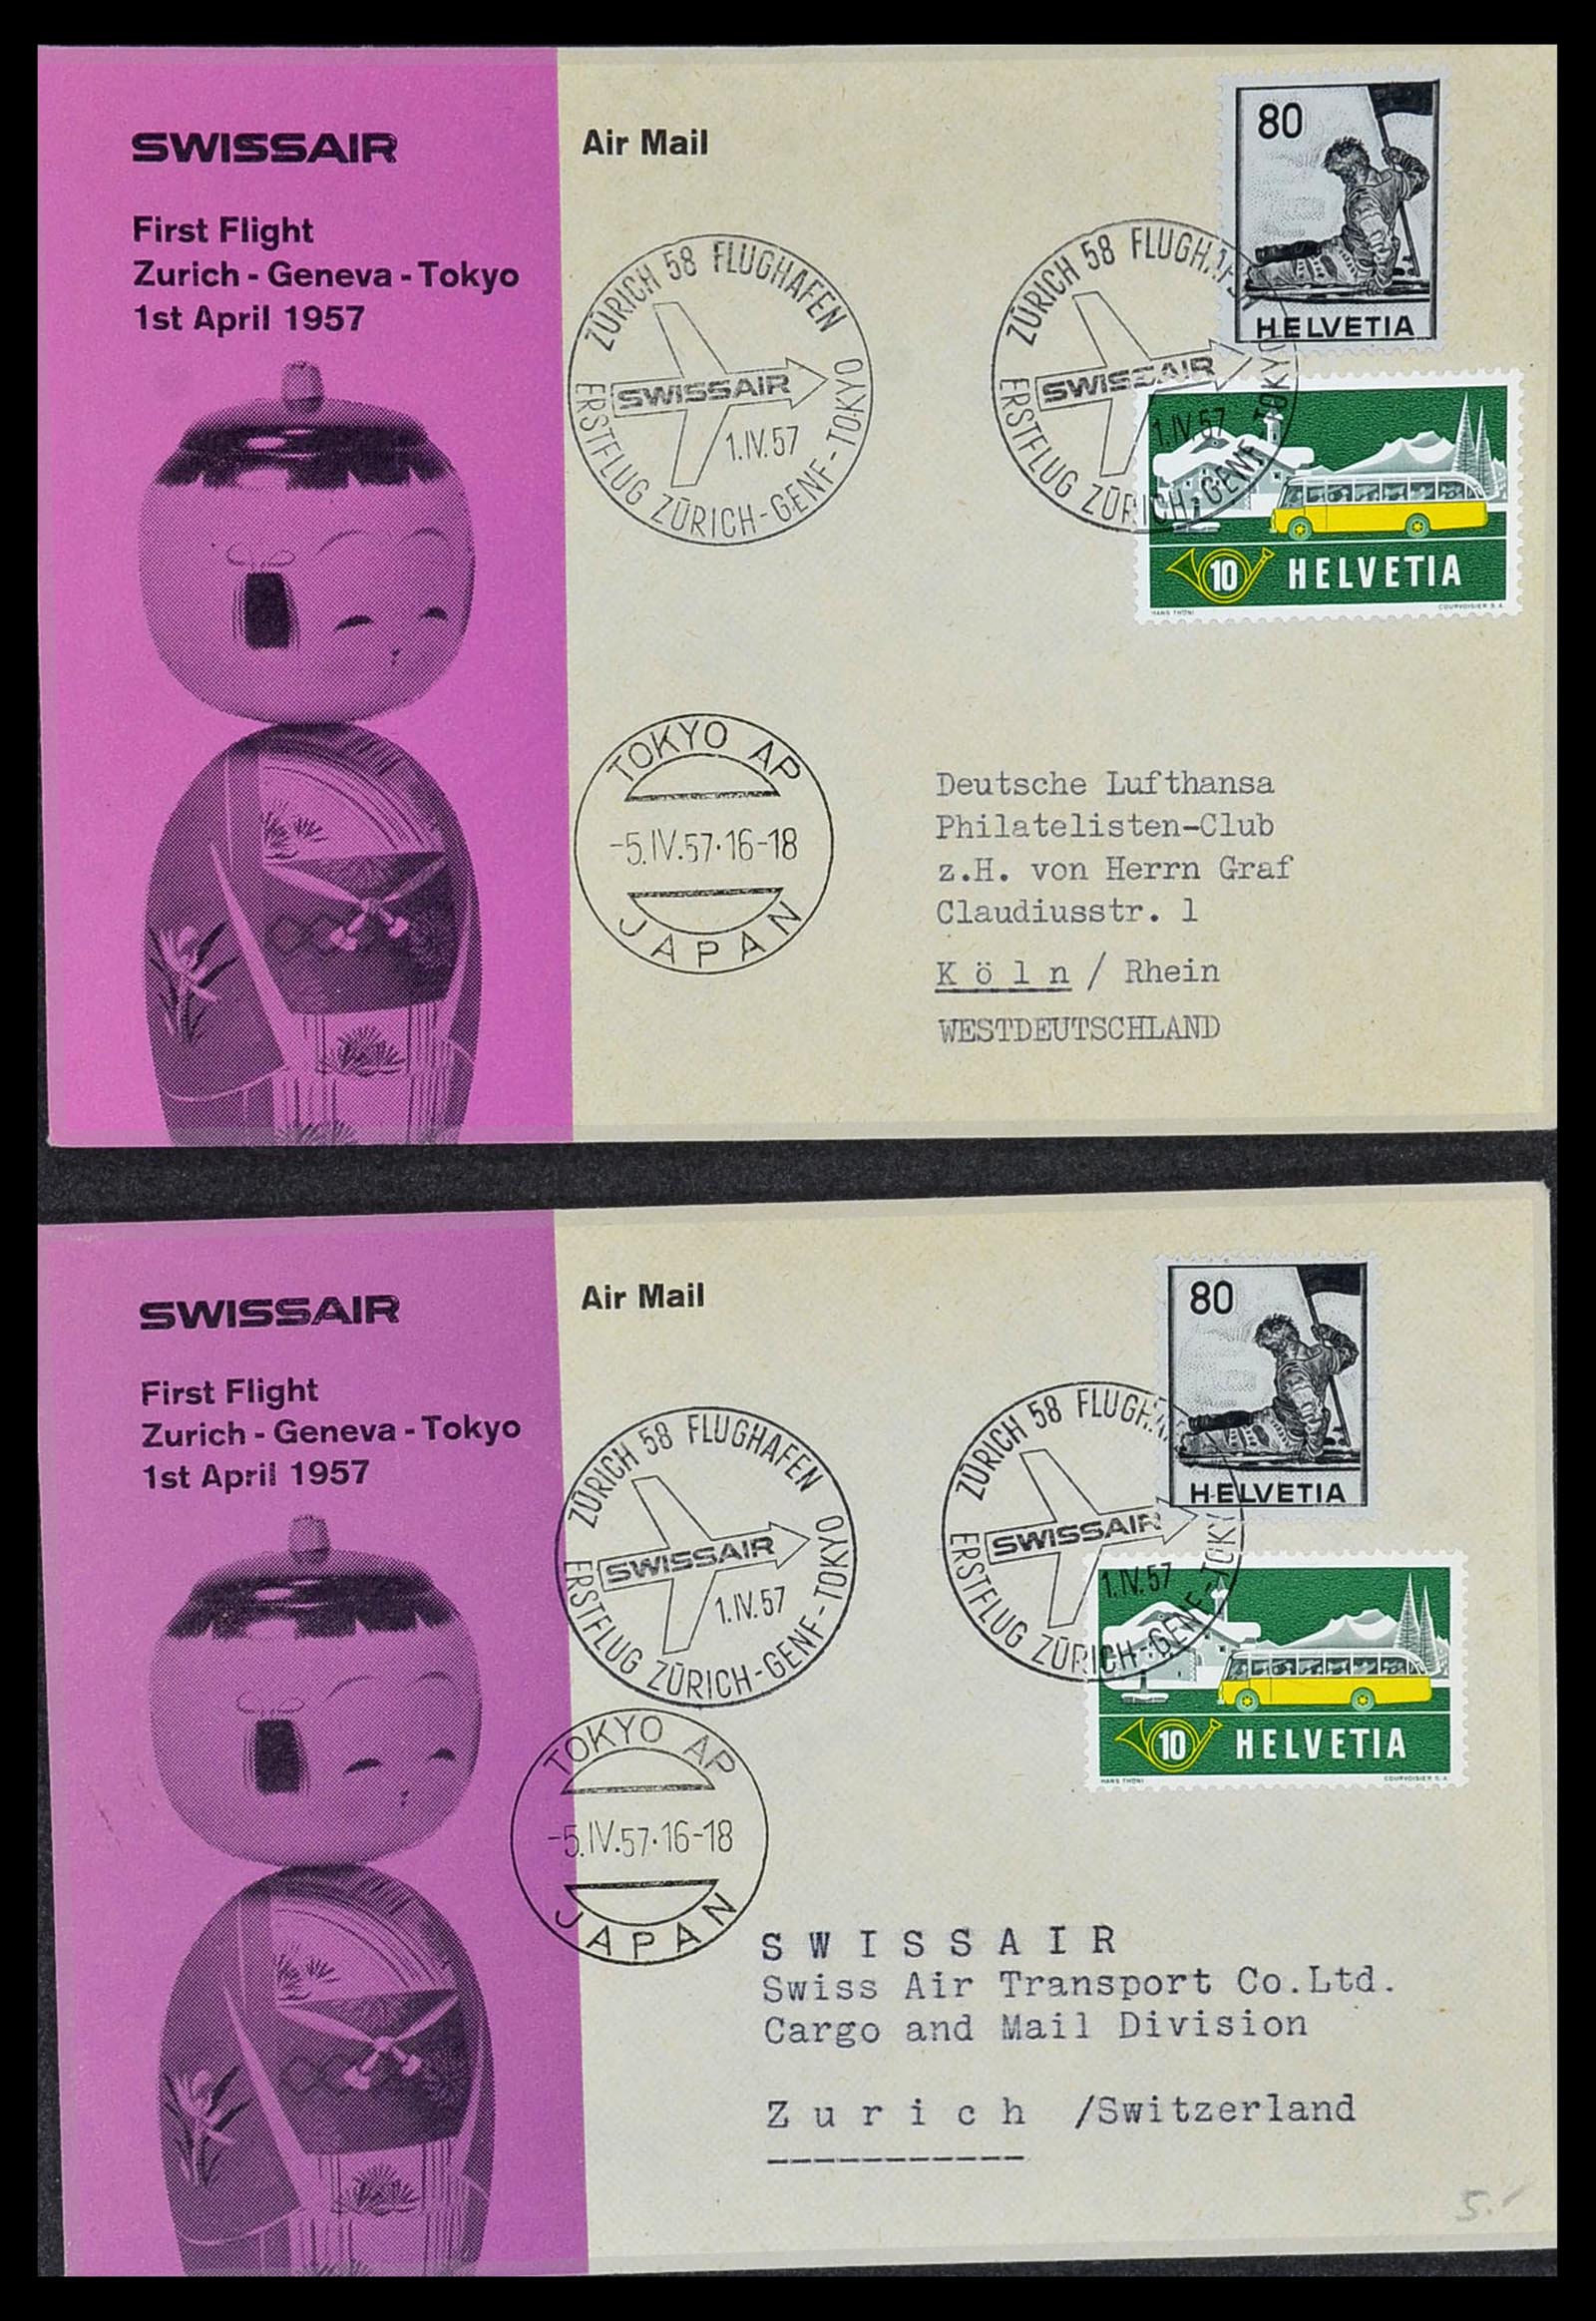 34141 124 - Stamp collection 34141 Switzerland airmail covers 1920-1960.